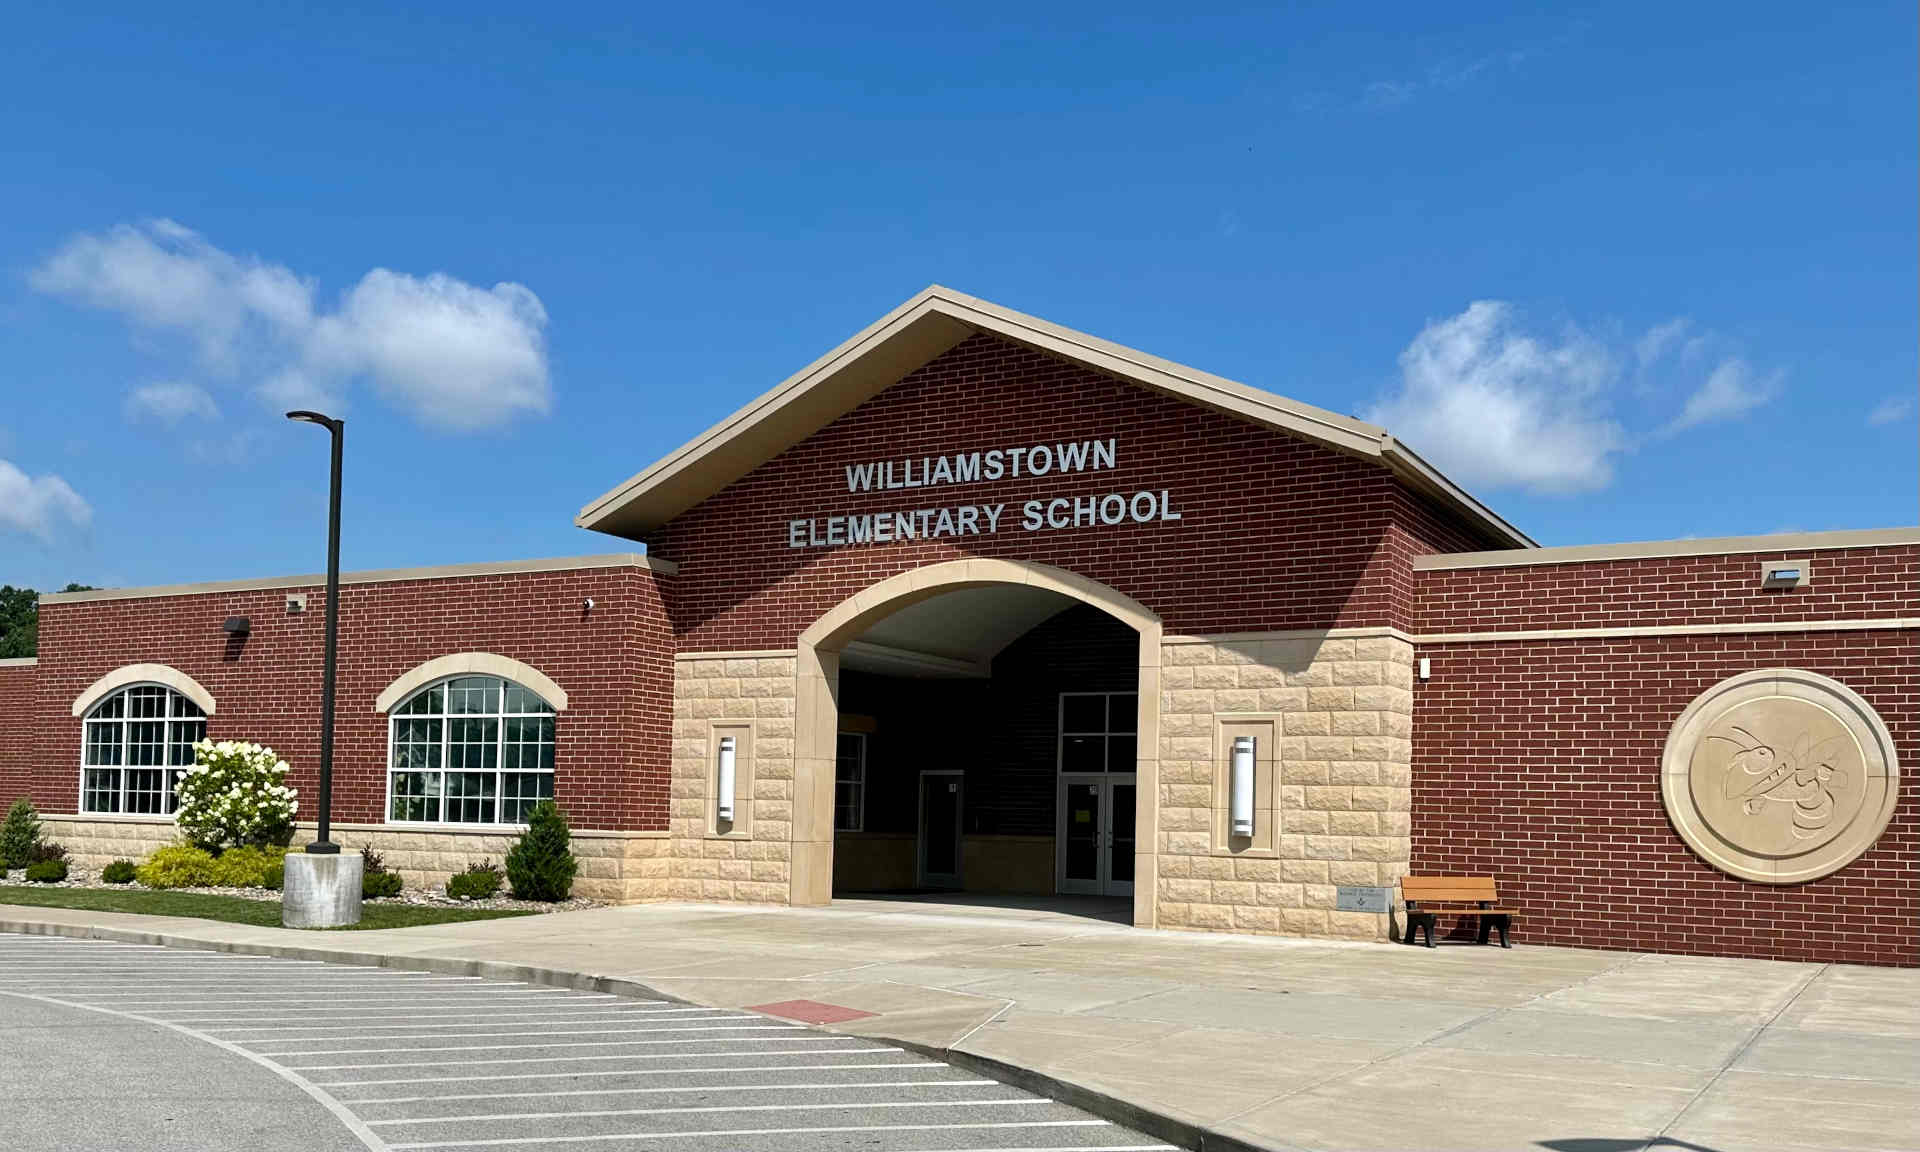 outside view of williamstown elementary school building with parking lot in front and a blue sky with limited clouds